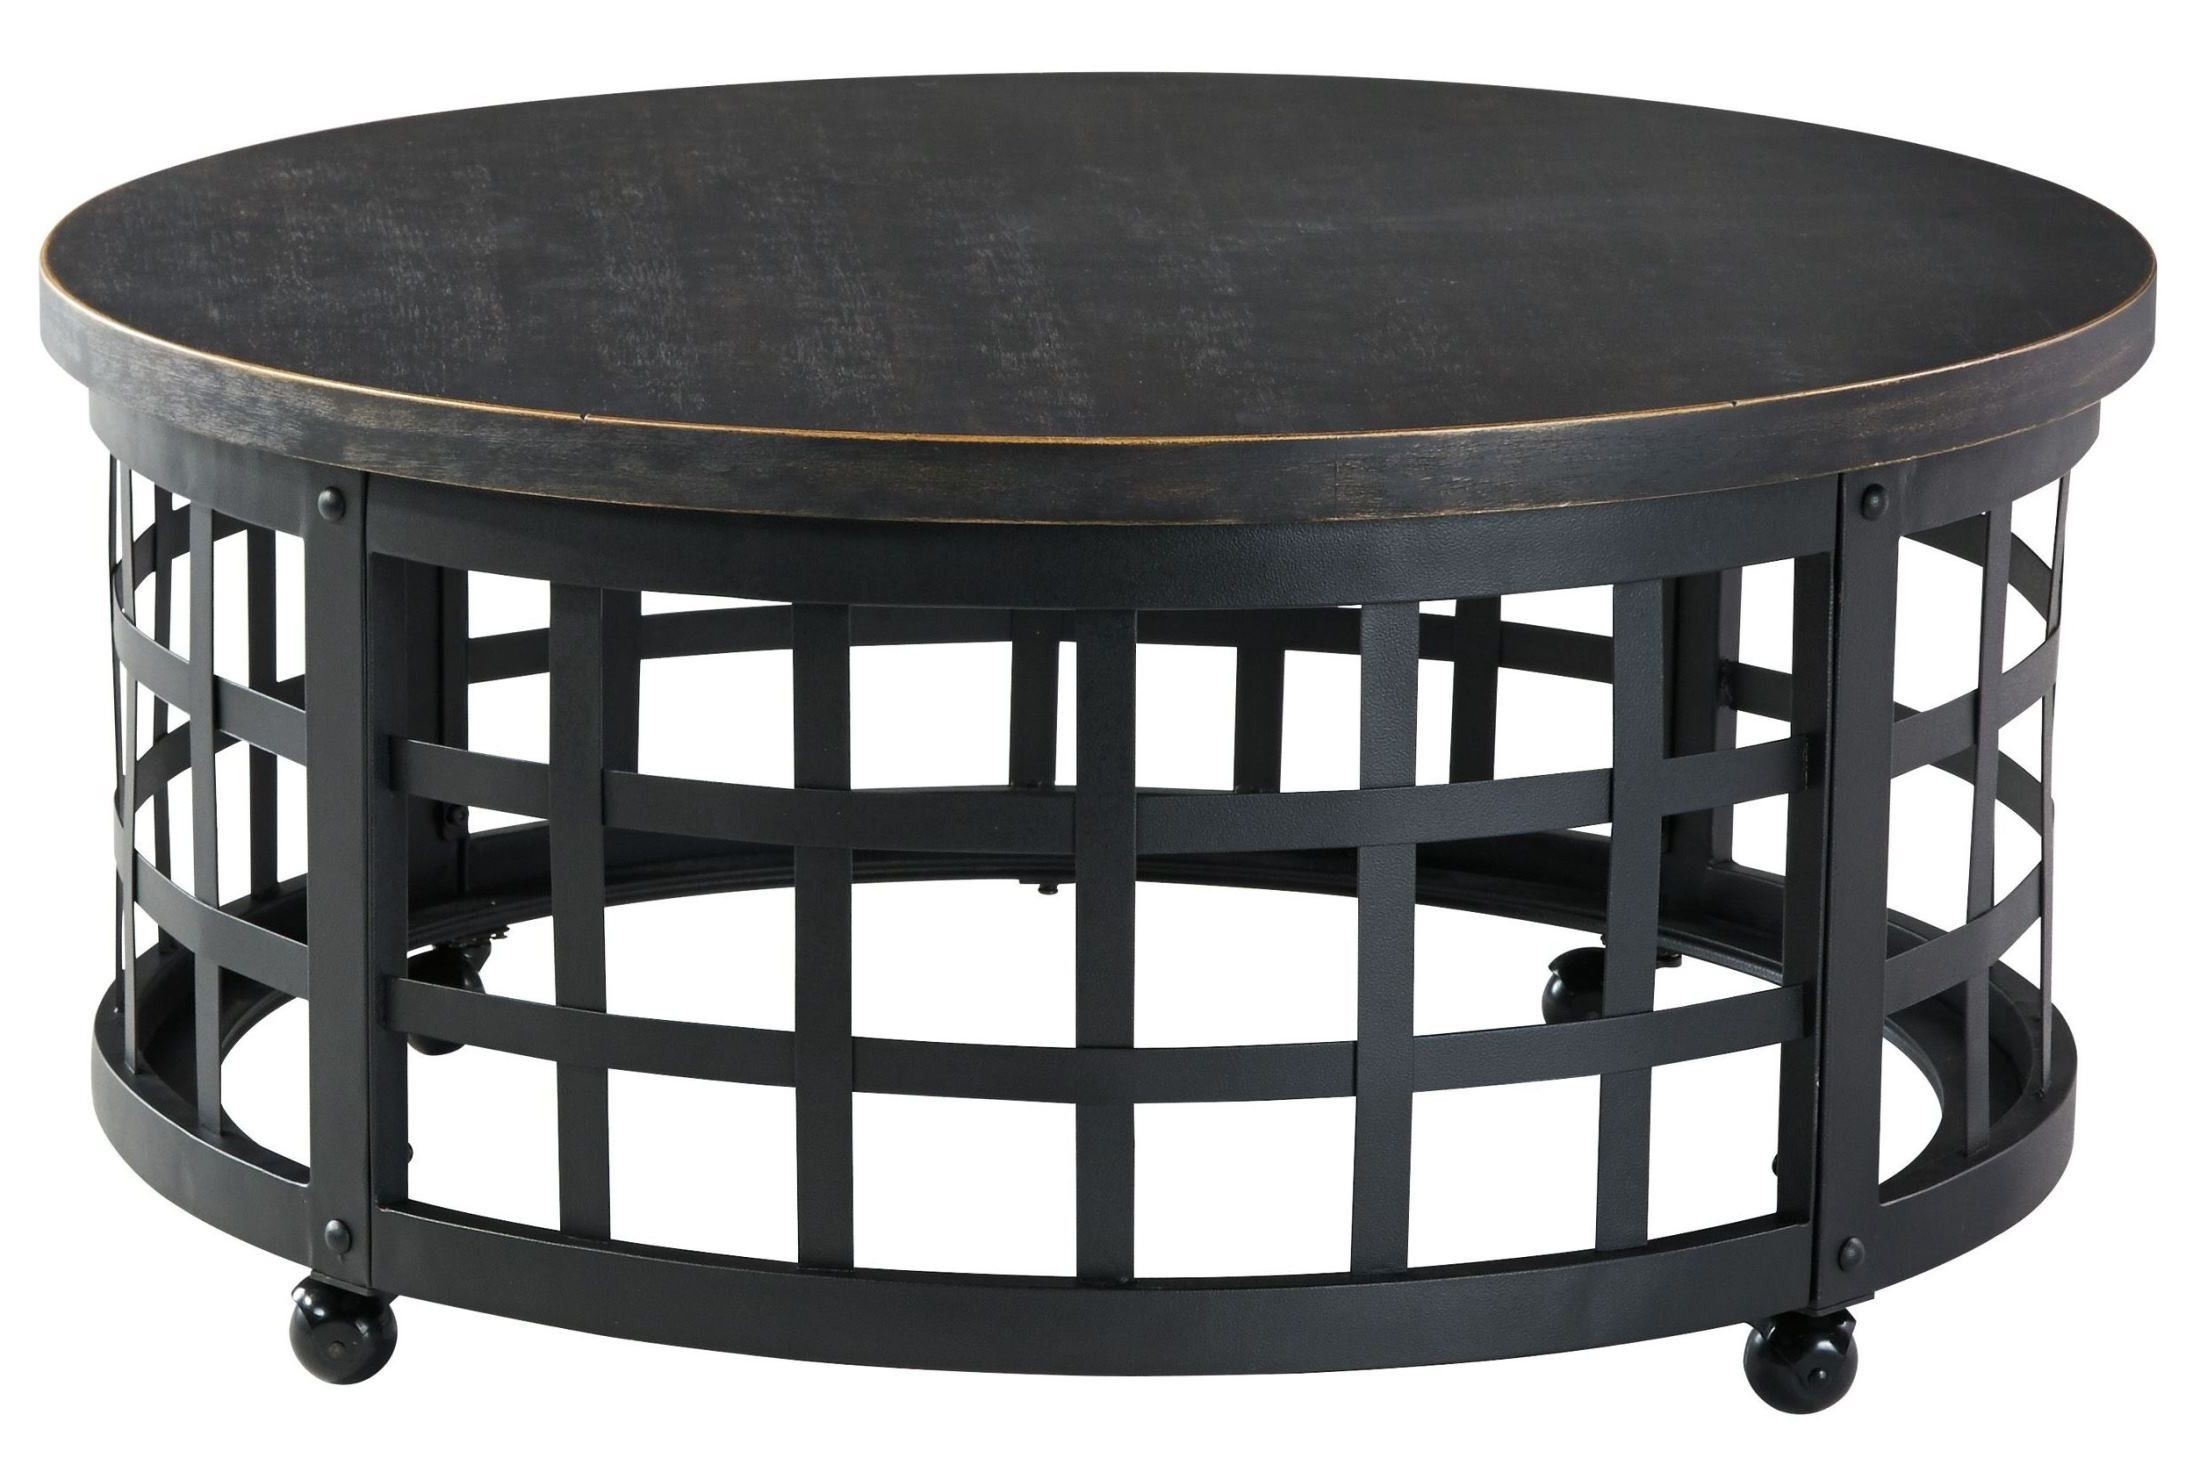 2020 Natural And Black Cocktail Tables With Marimon Round Cocktail Table From Ashley (t746 8 (Gallery 5 of 20)